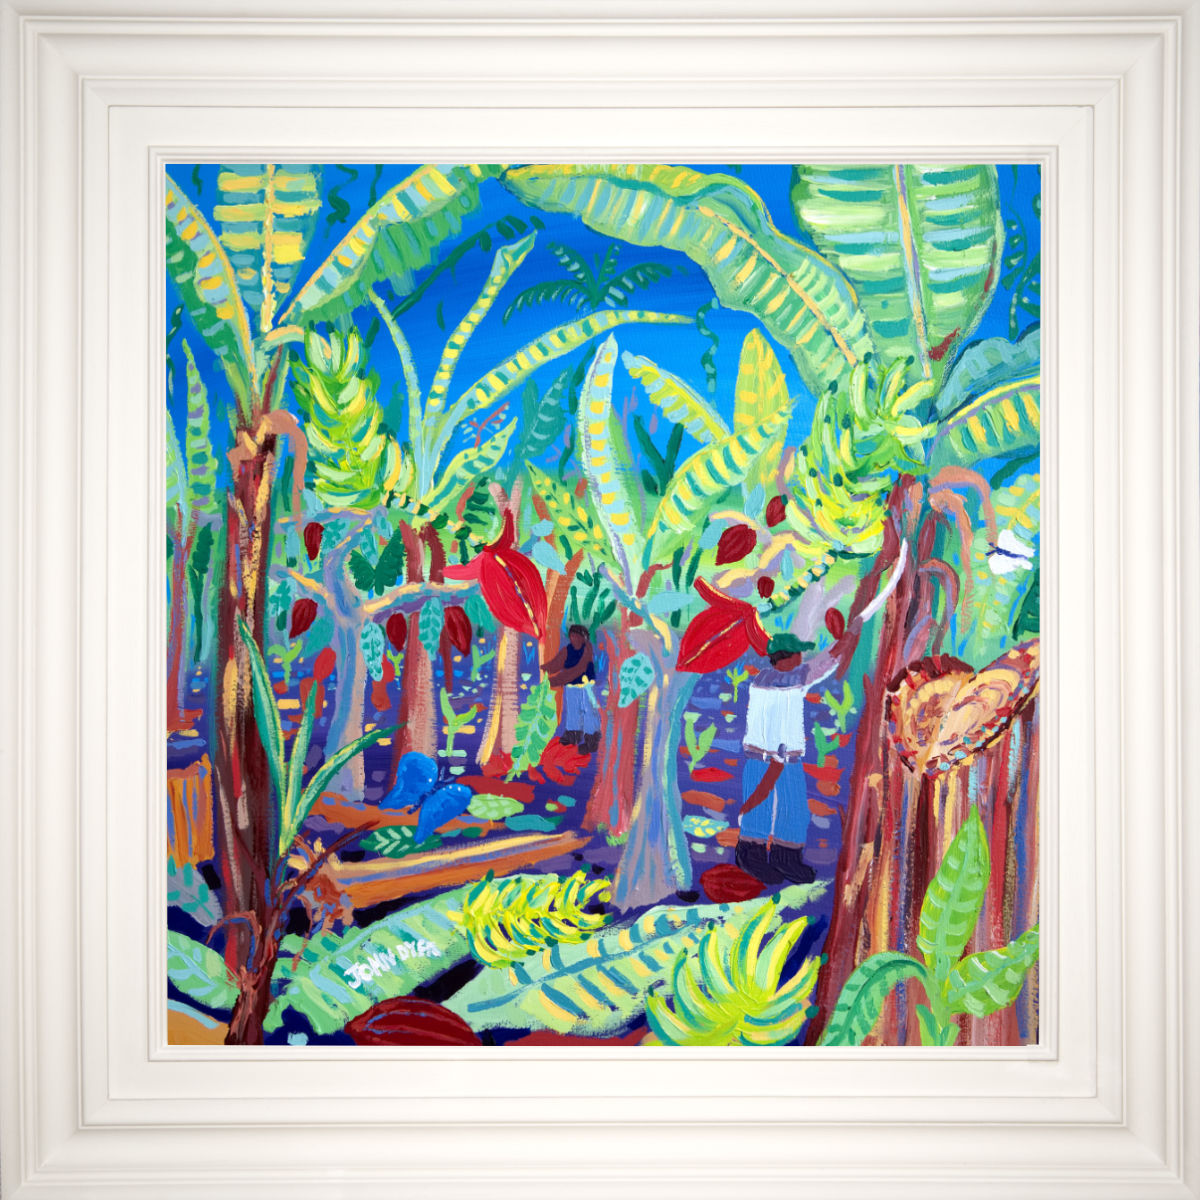 John Dyer Painting. 'Intercropping and Chopping, Costa Rica Bananas and Chocolate Trees', Caribbean Art Gallery